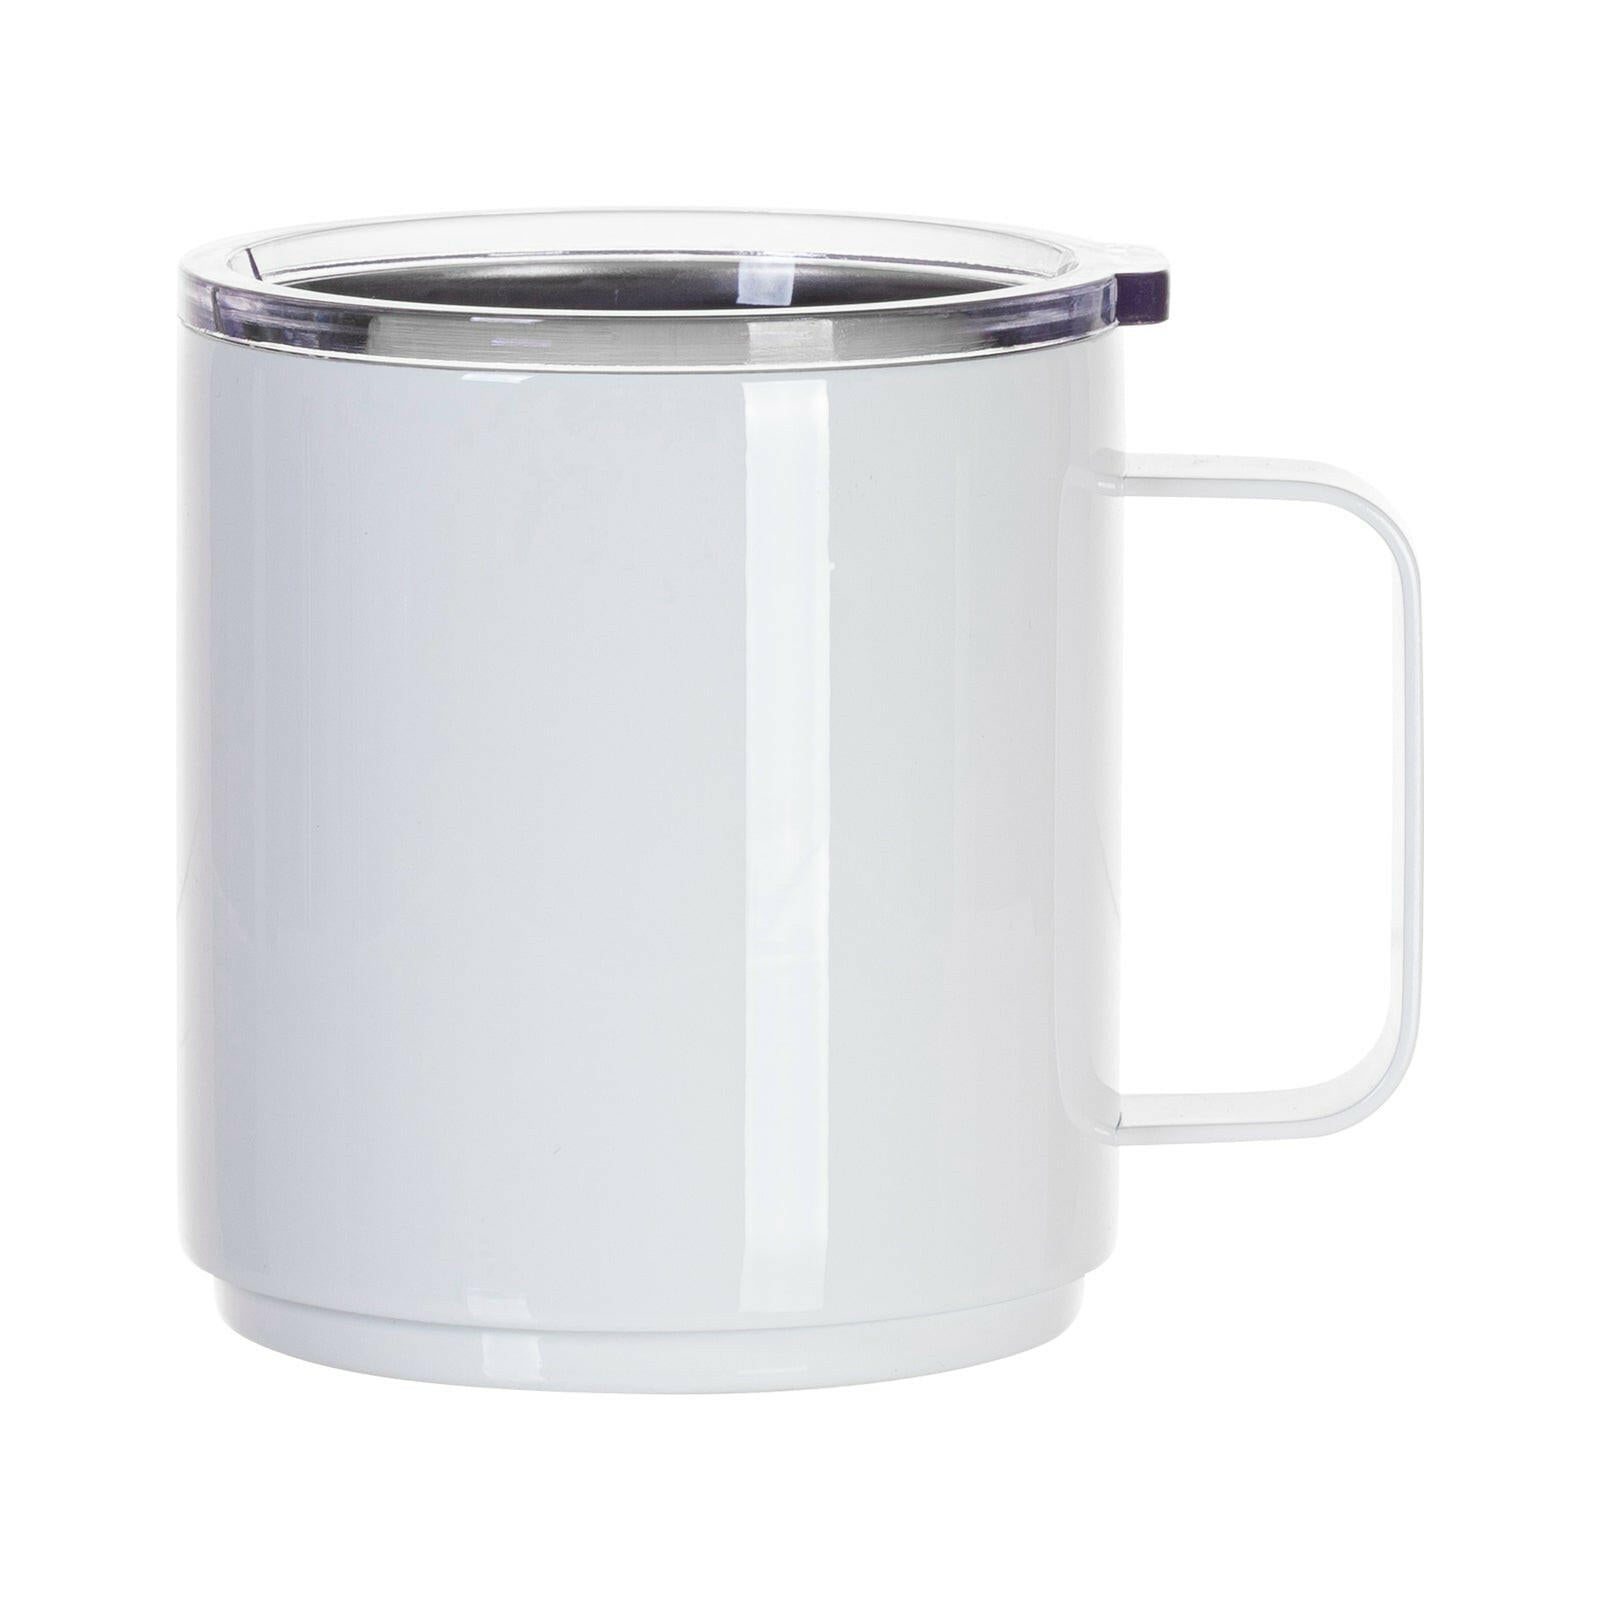 13oz Stainless Steel Stackable Sublimation Mugs - 4 Pack.